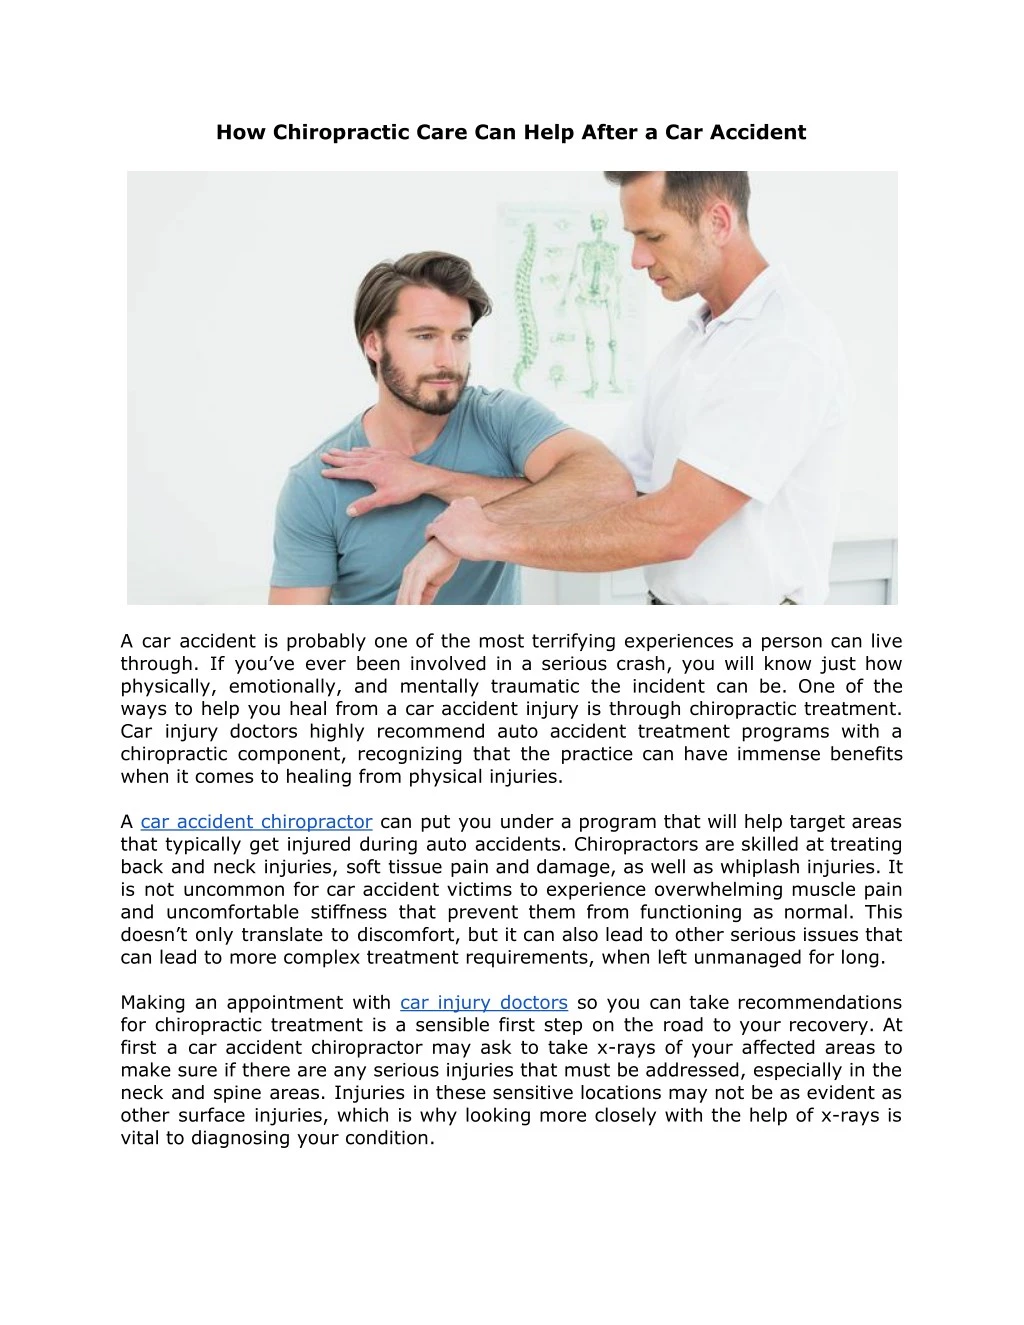 how chiropractic care can help after